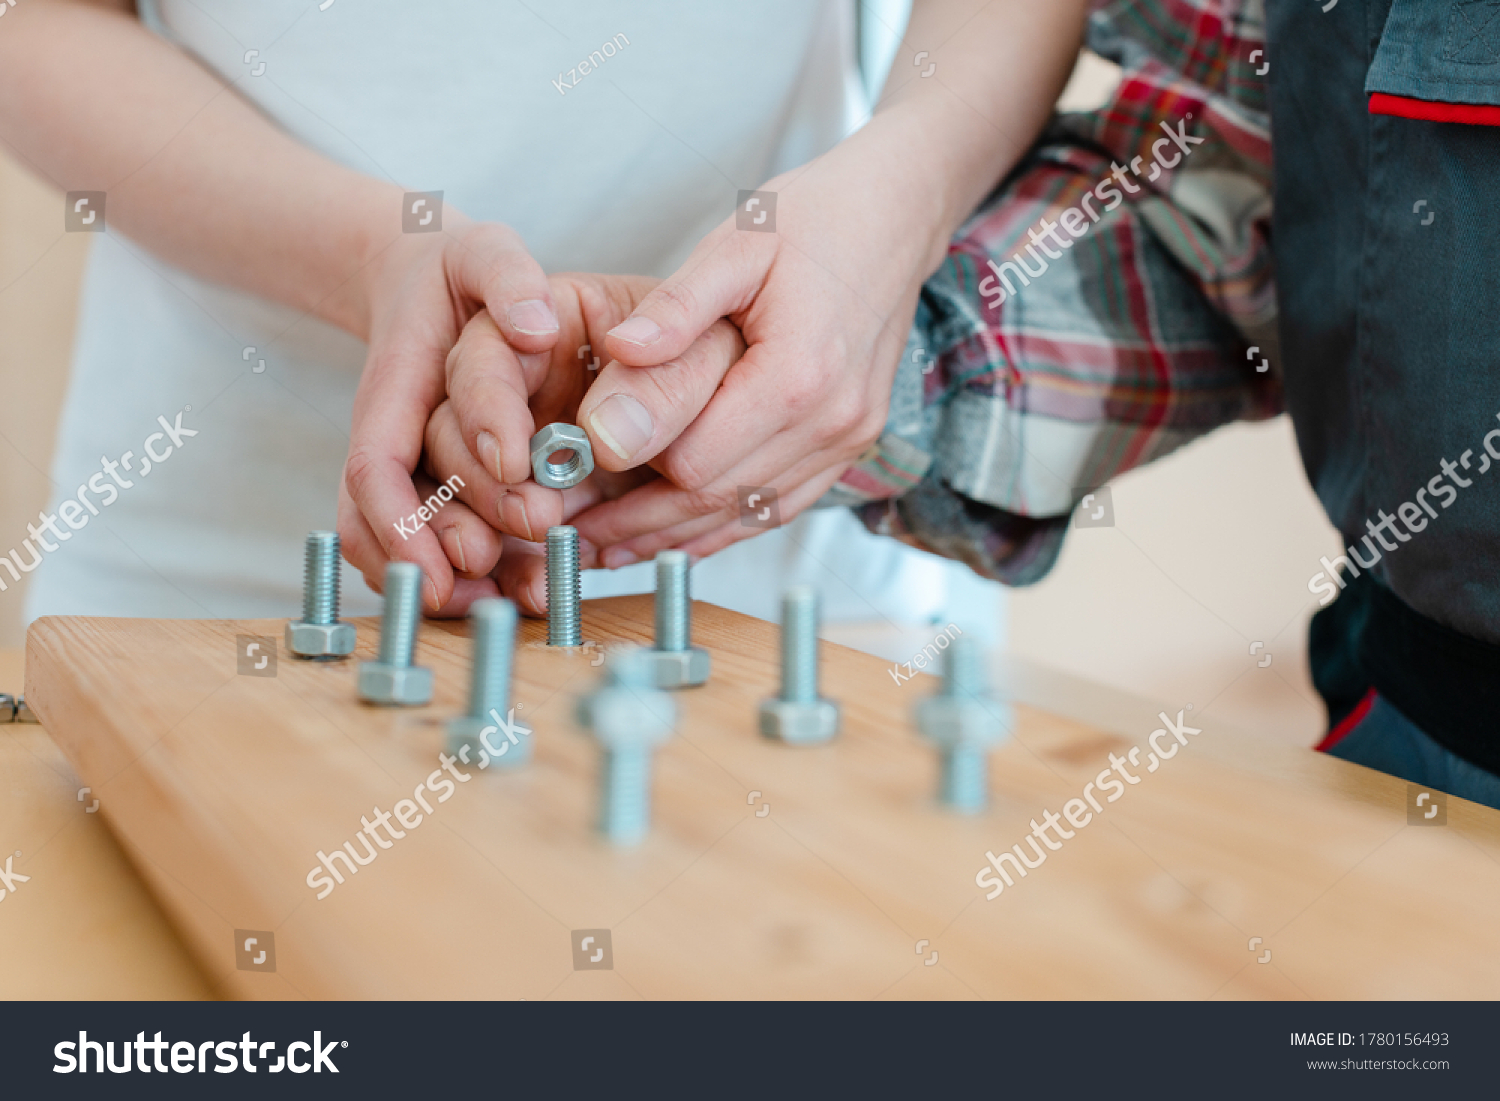 Closeup on hand of man in occupational therapy screwing nut on bolt #1780156493